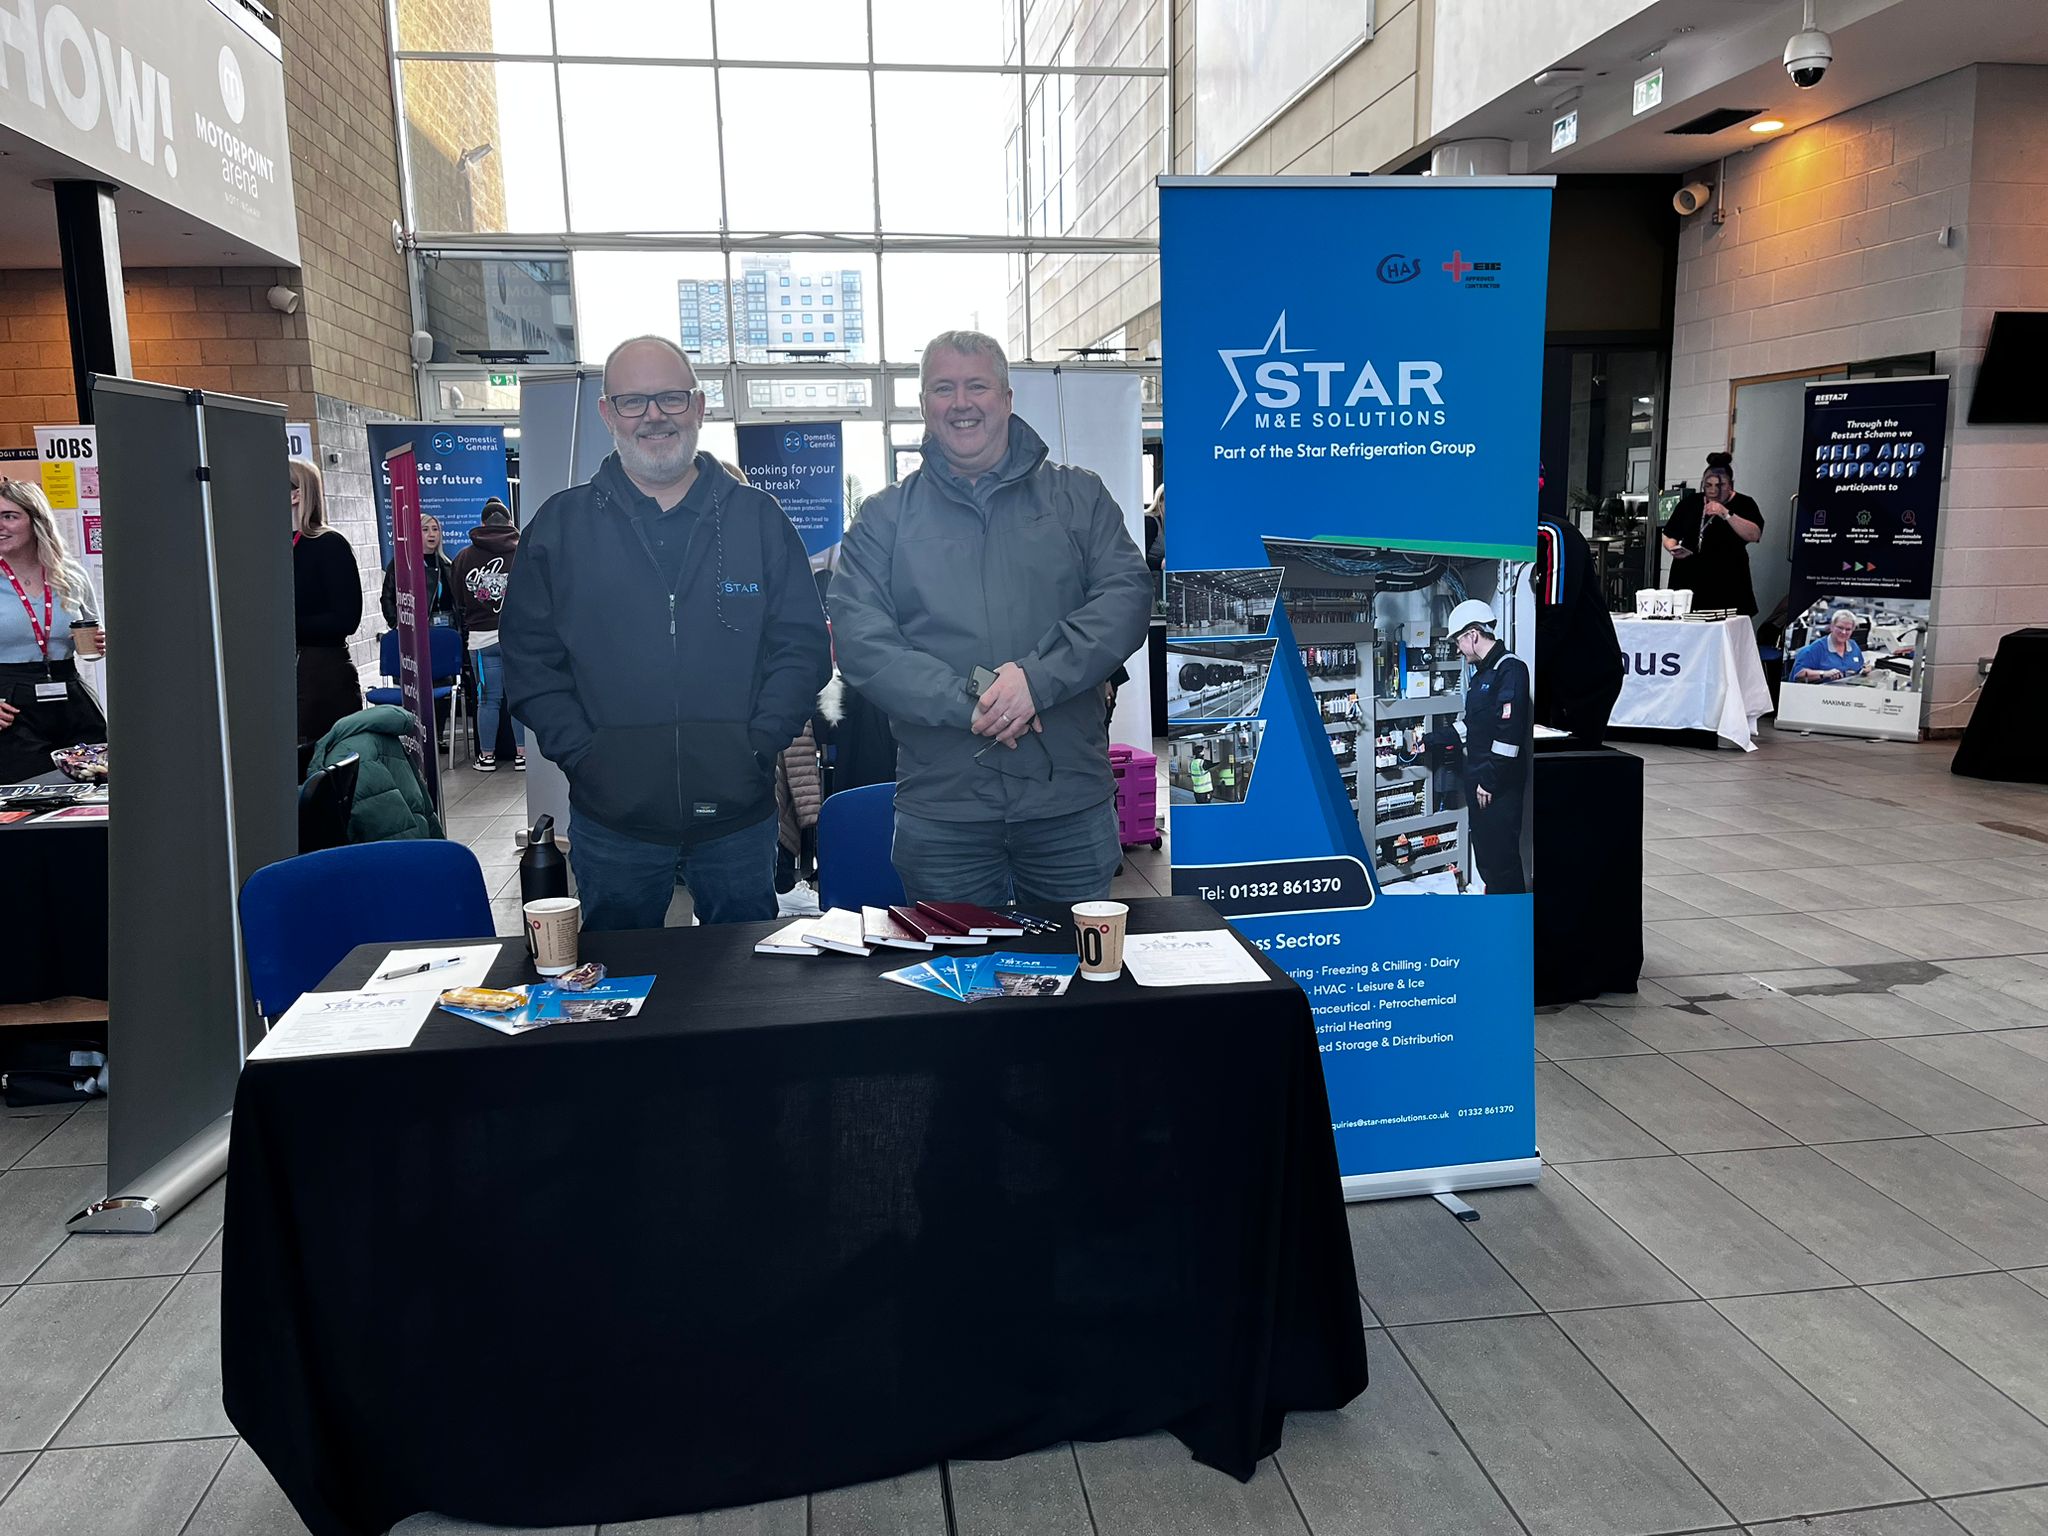 Star M&E Solutions at our event in Nottingham